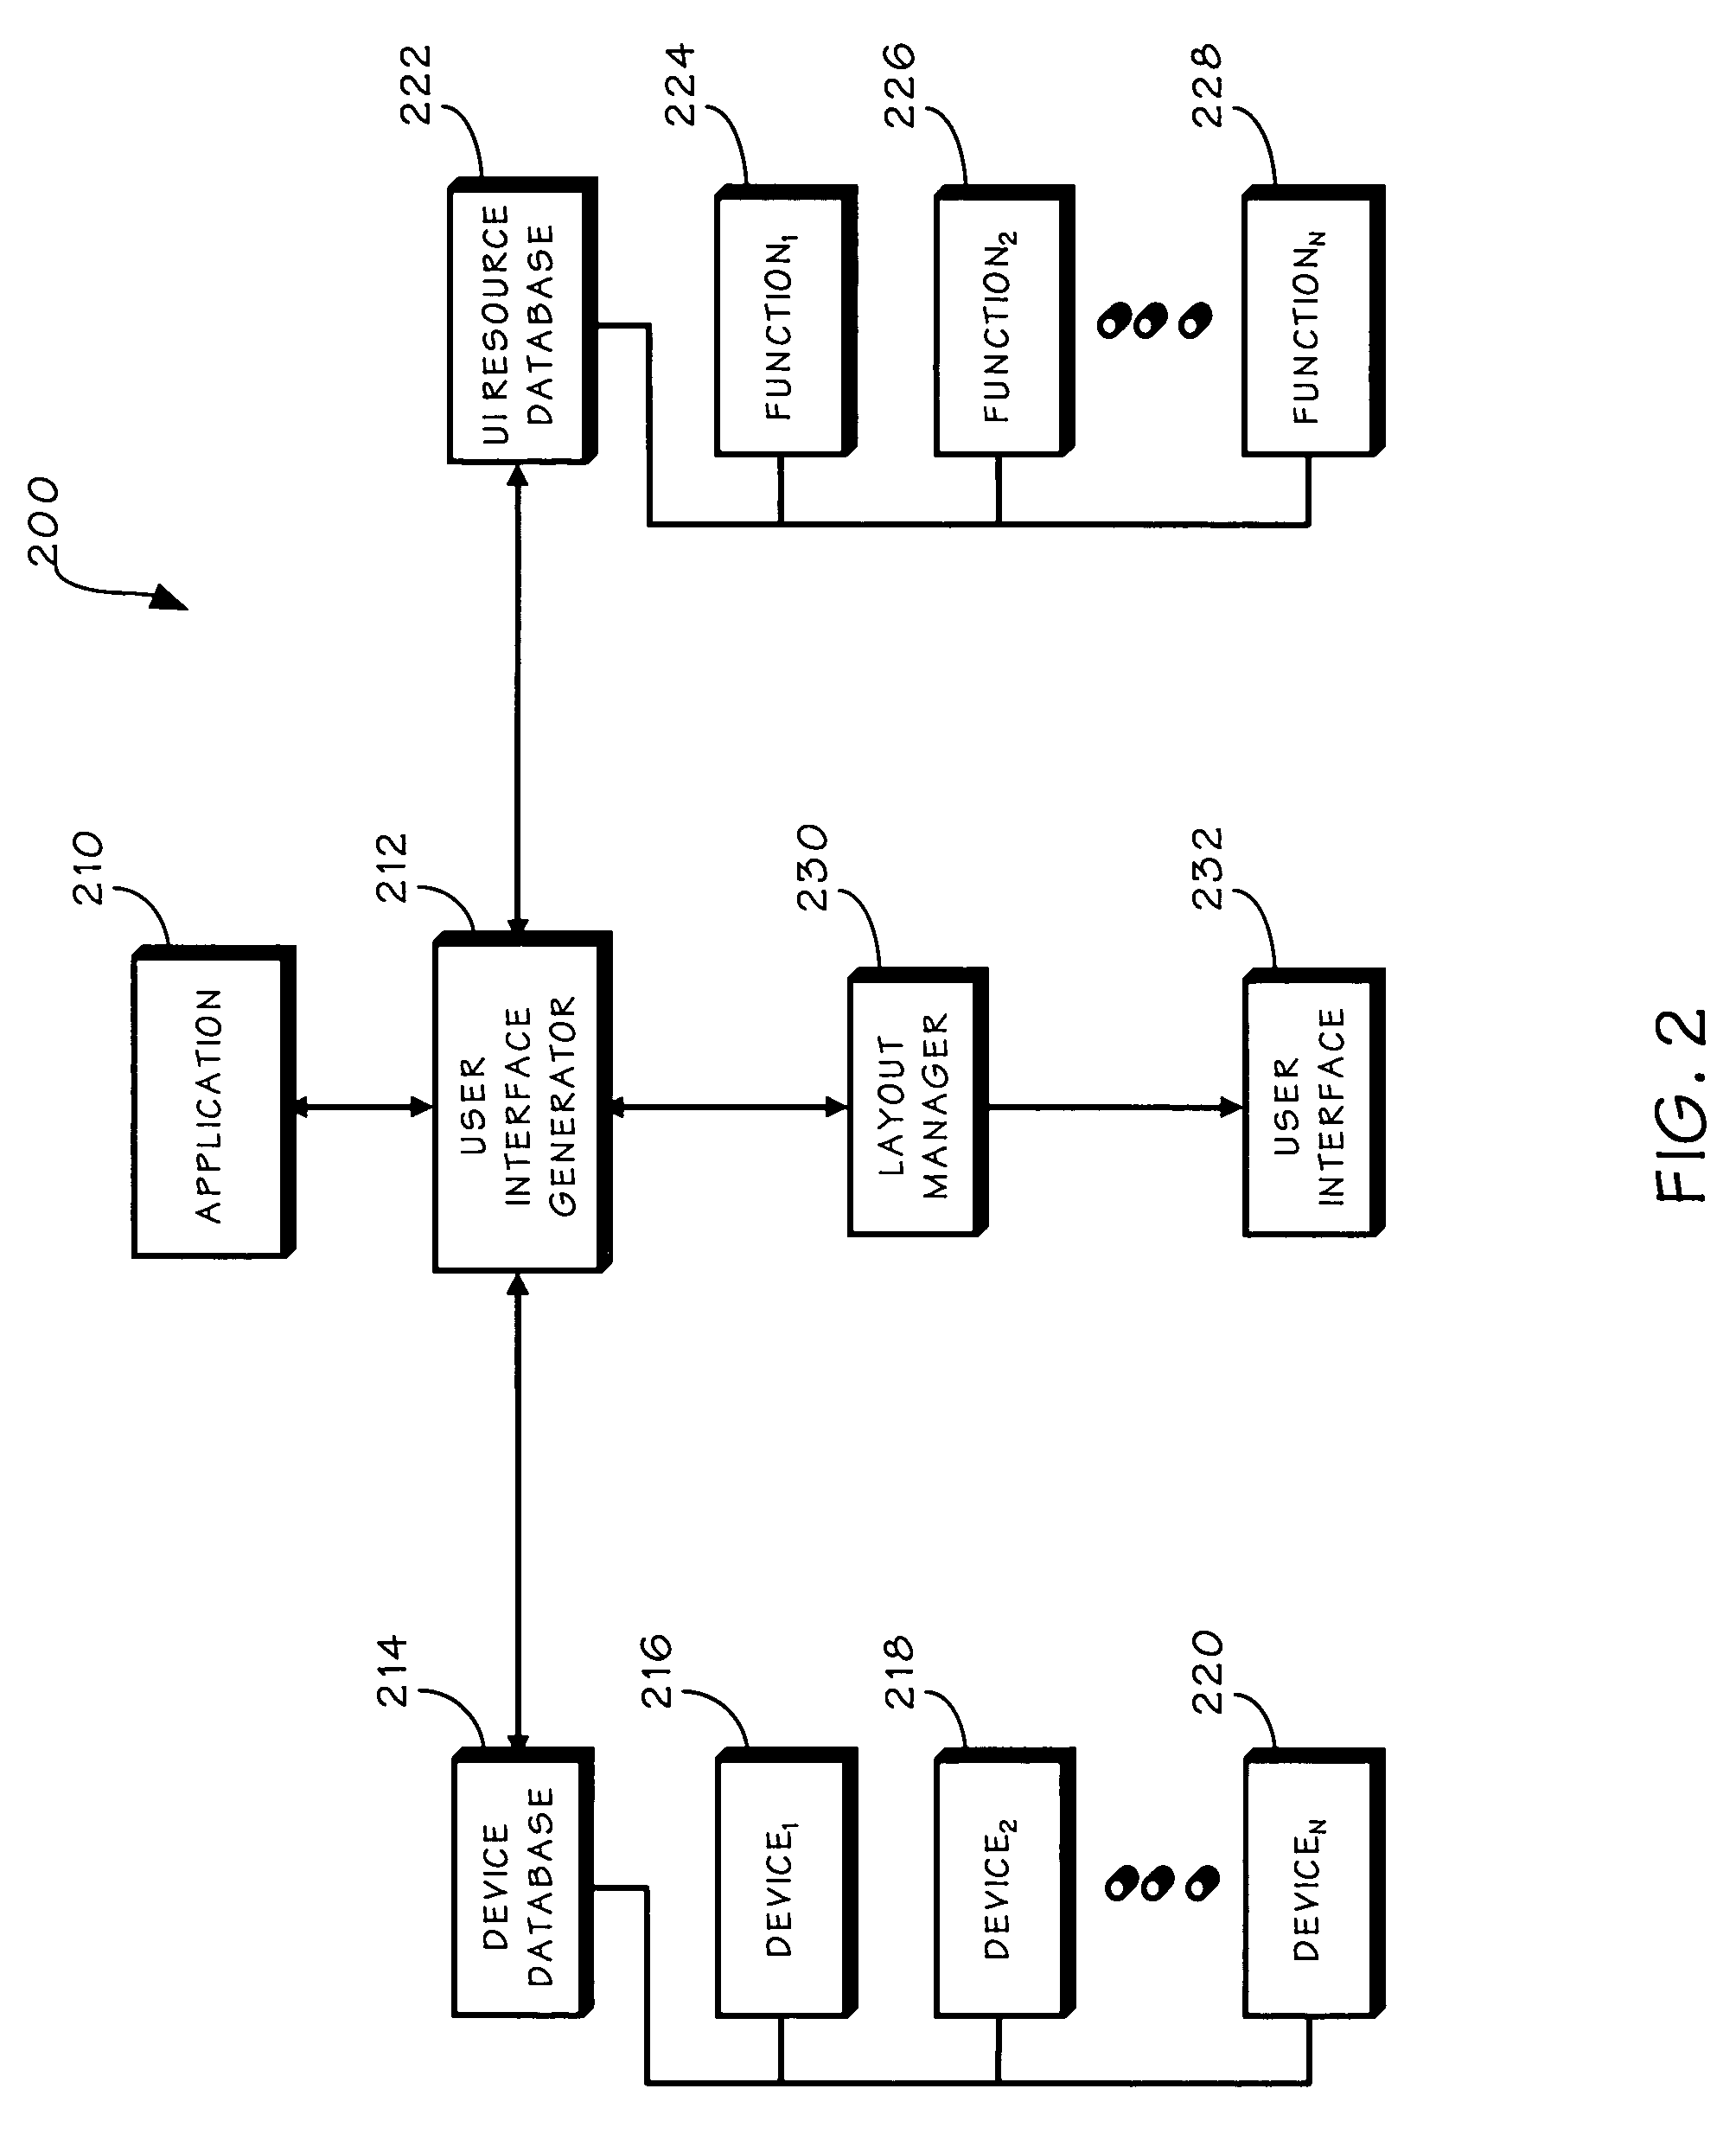 Method and apparatus for automatically generating a device user interface